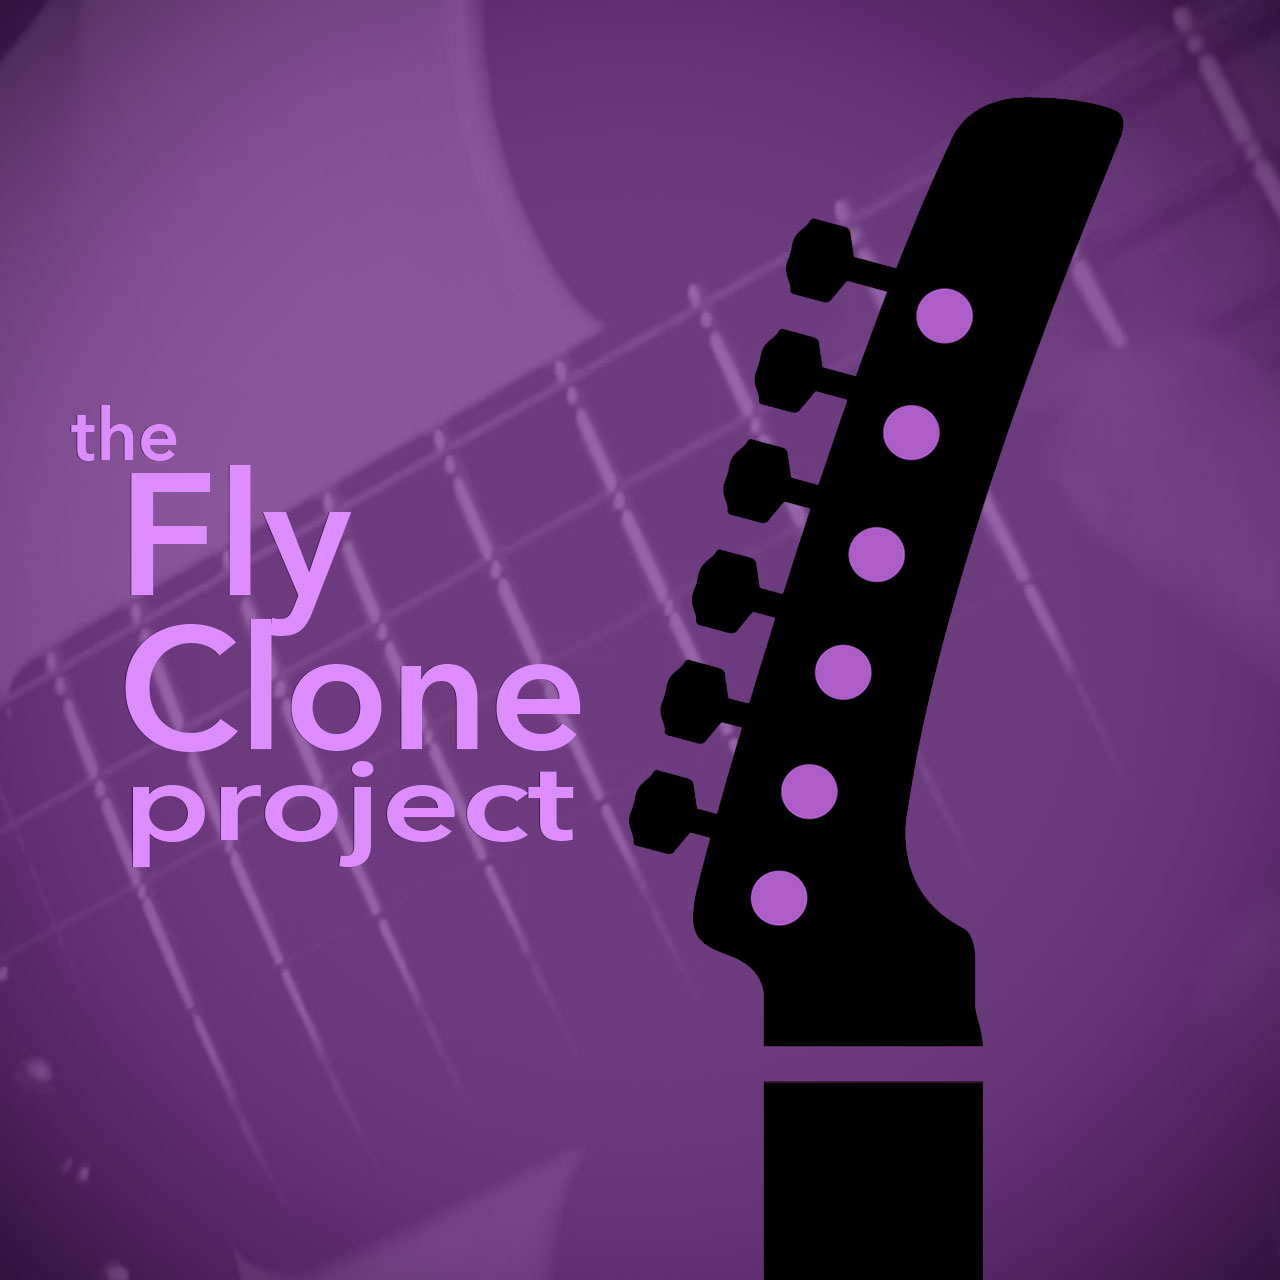 the Fly Clone project